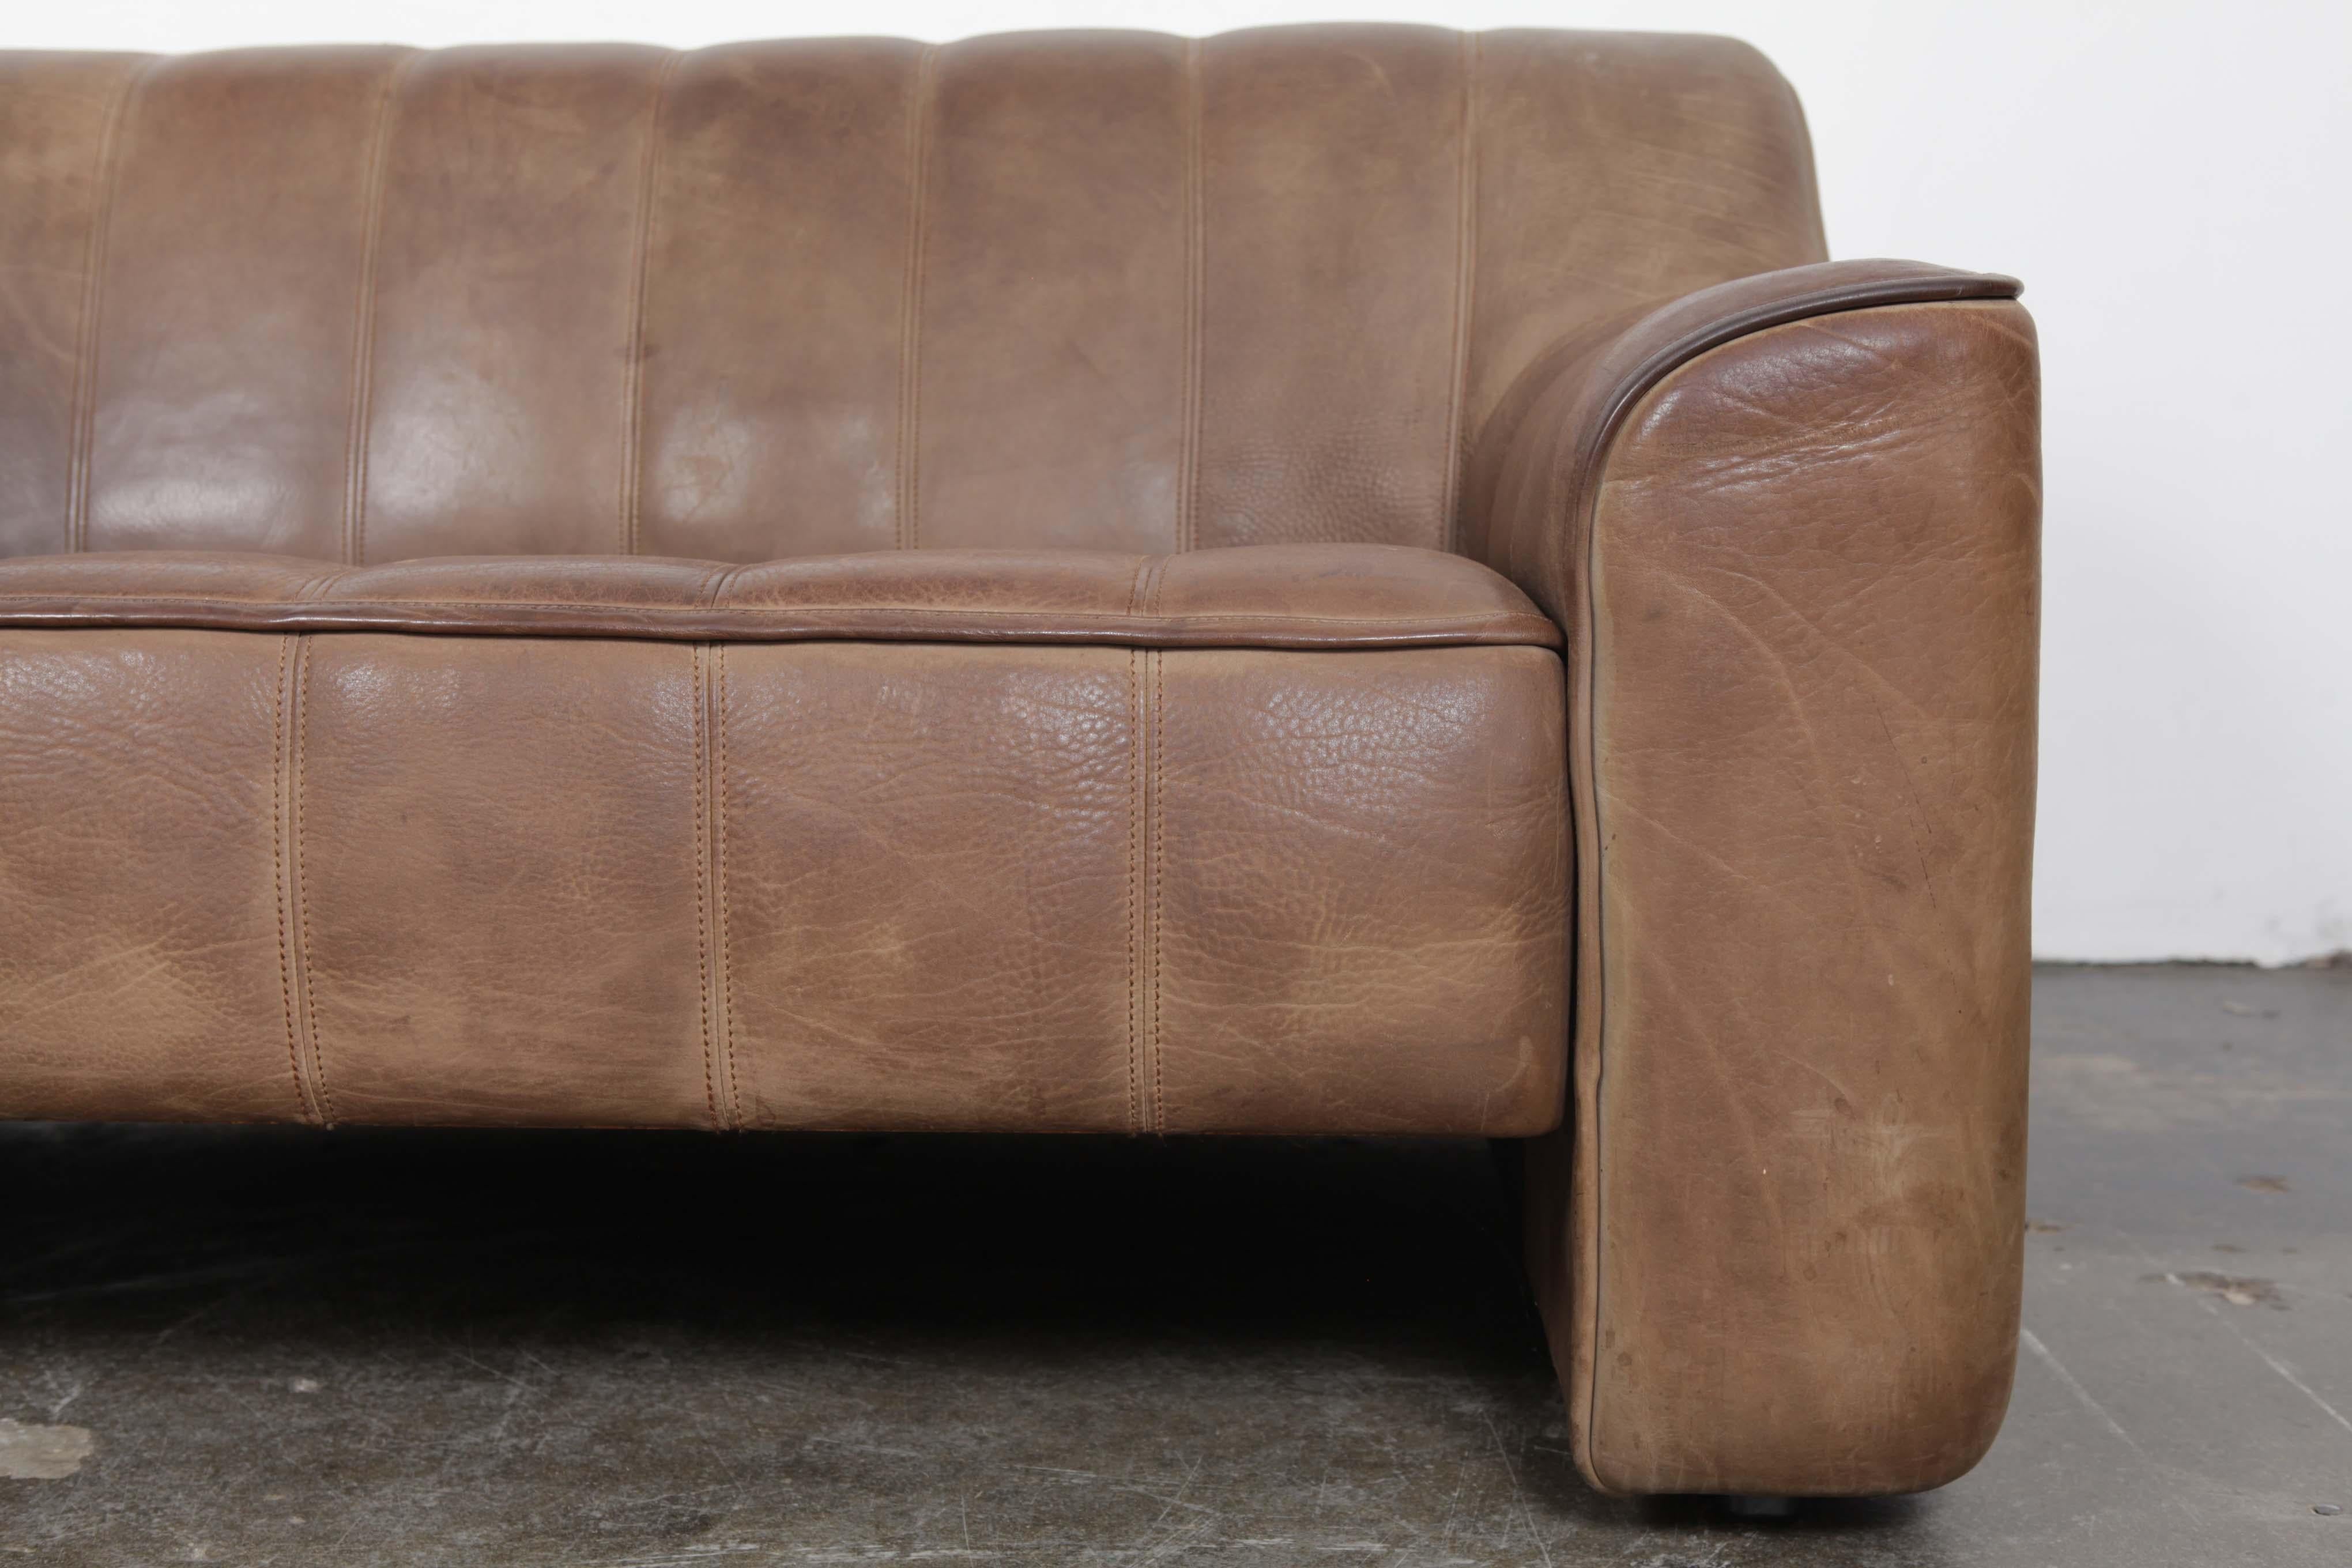 De Sede DS 44 2-Seat Sofa in Buffalo Leather, Switzerland, 1970s For Sale 6